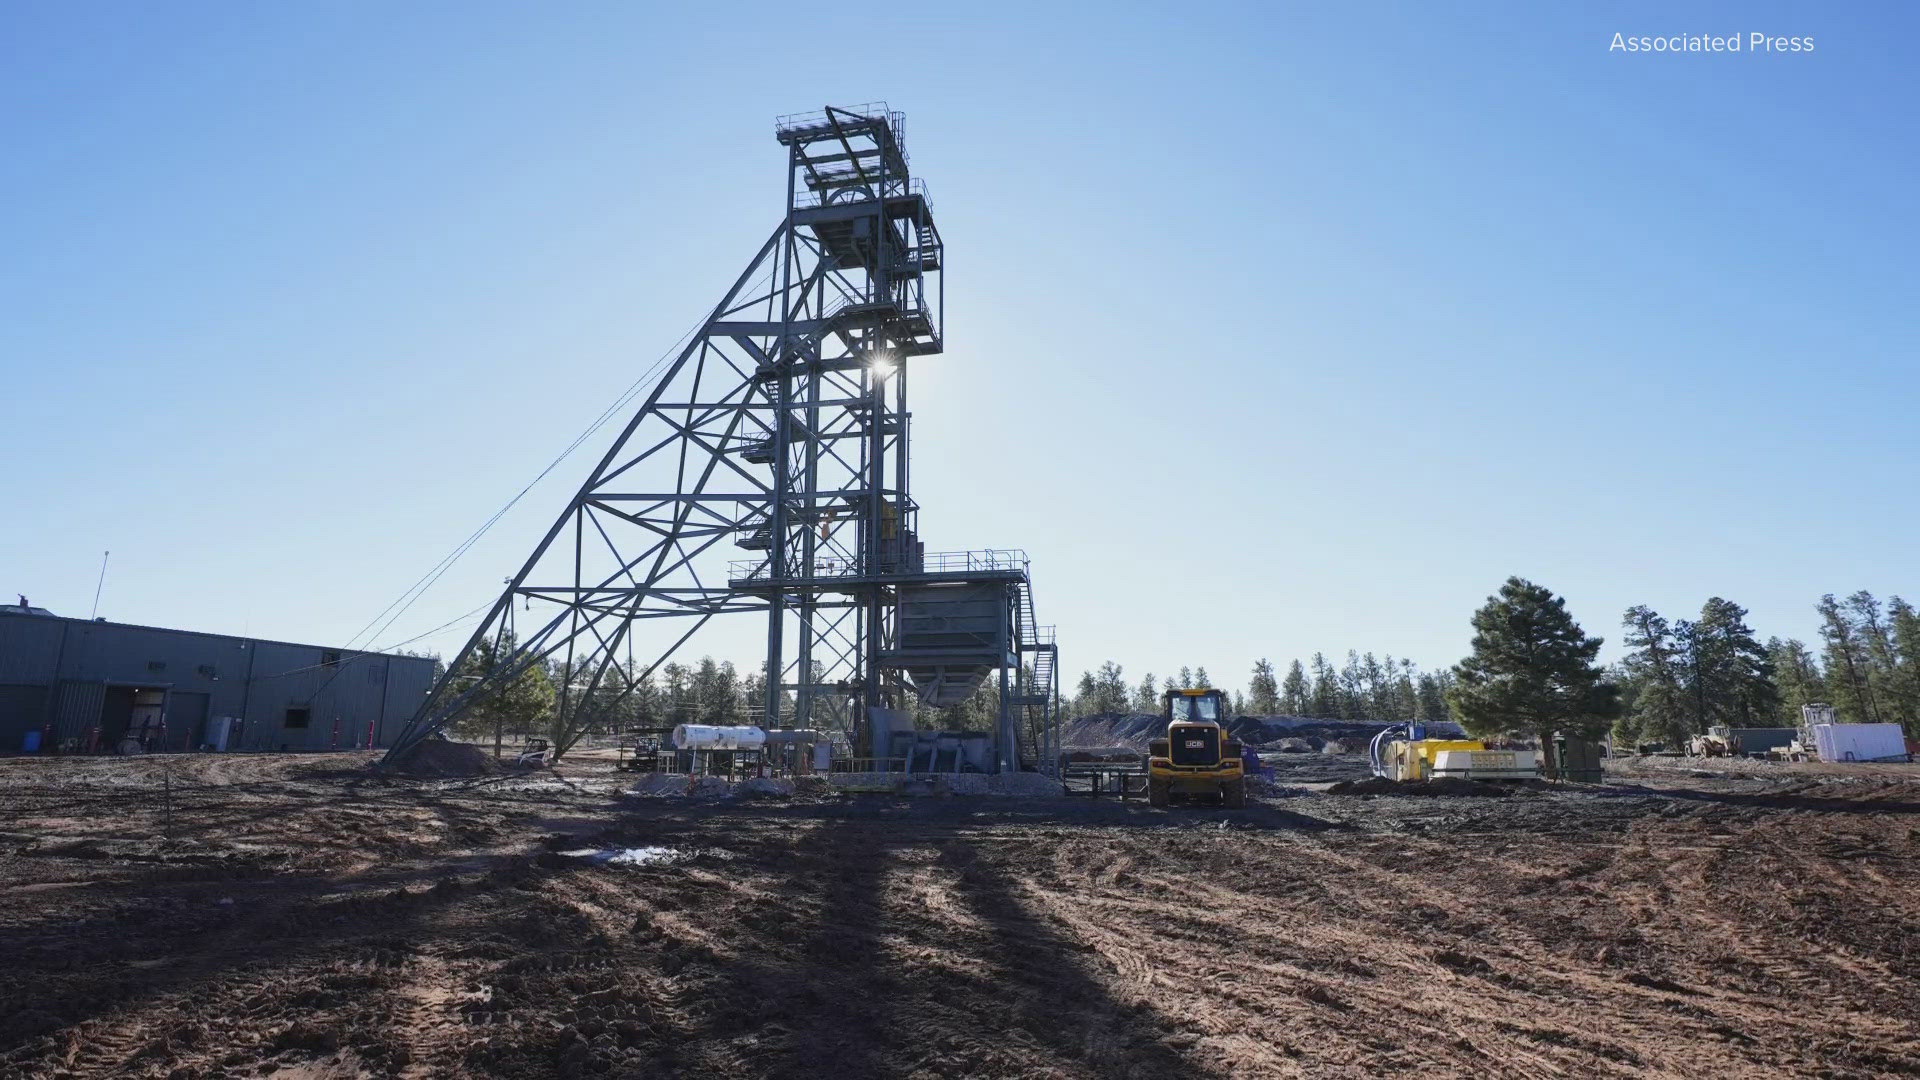 The Pinyon Plain Mine began mining uranium in December and will likely be mining for at least five years, according to the company running the mine.